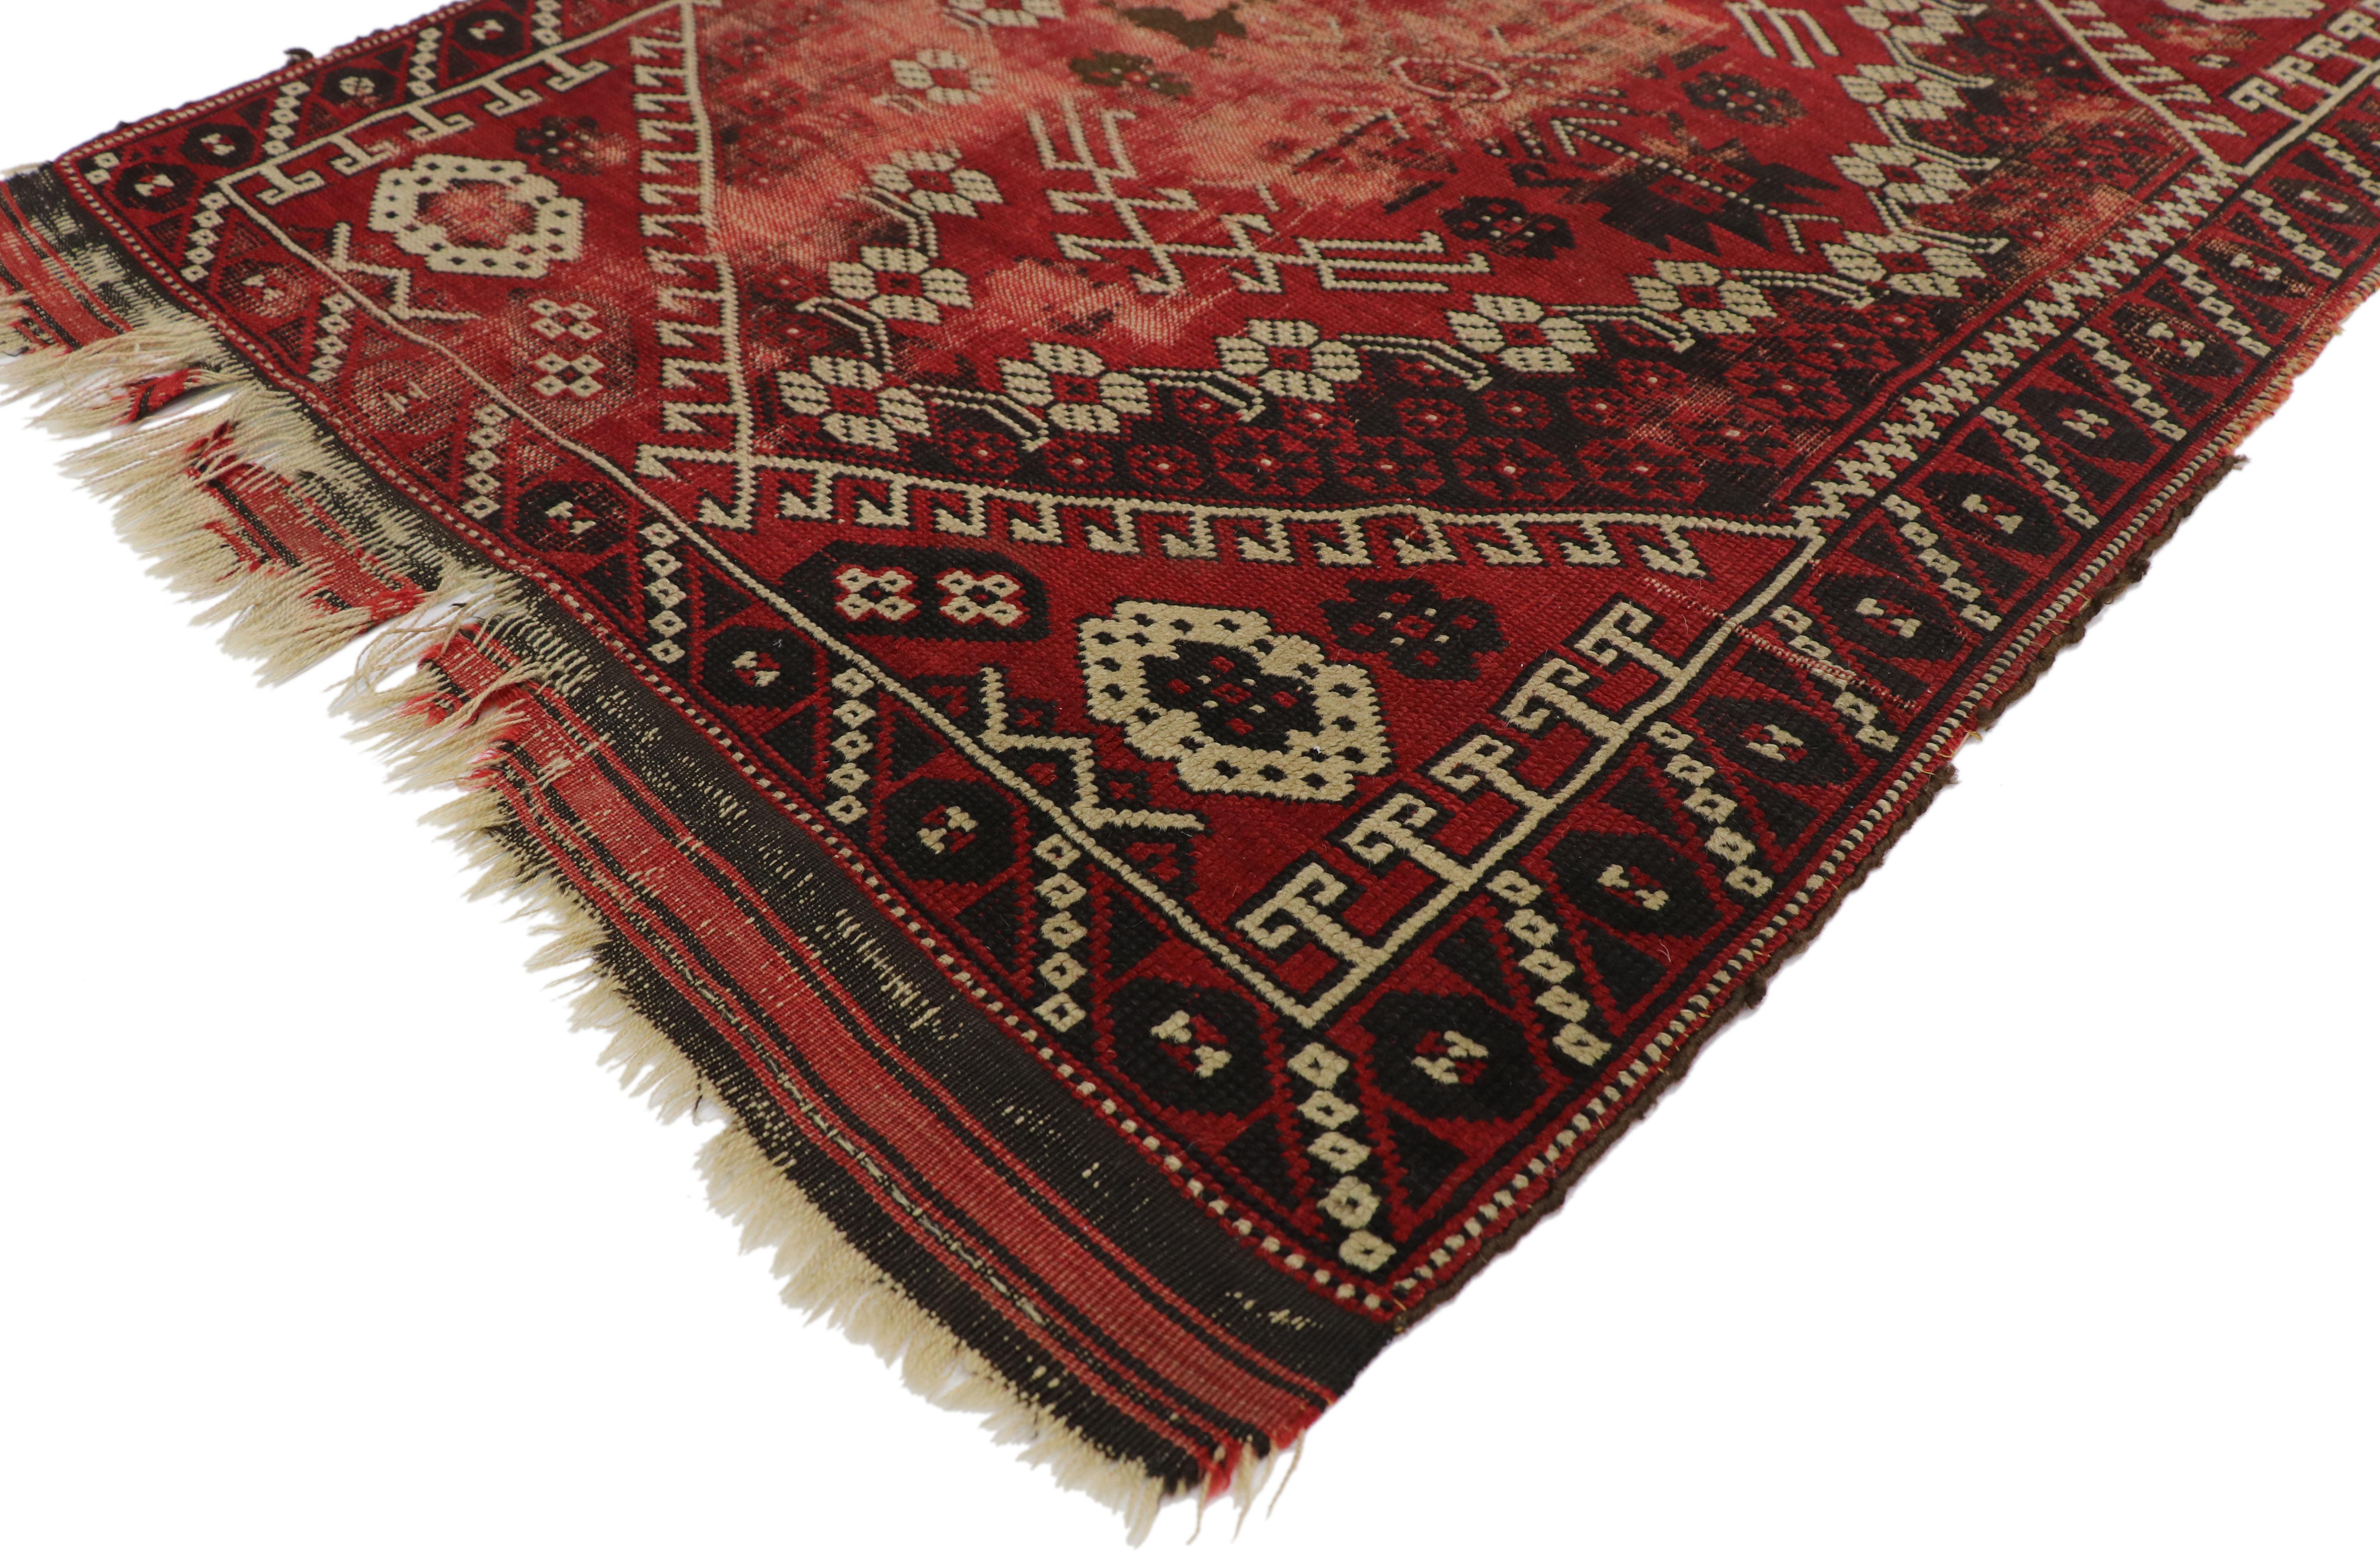 76628, distressed antique Afghani rug with Adirondack Lodge Style 02'11 x 03'10. This hand knotted wool distressed antique Afghani rug features a large-scale lozenge composed of four petaled flowers alternating with curved sickle leaves and